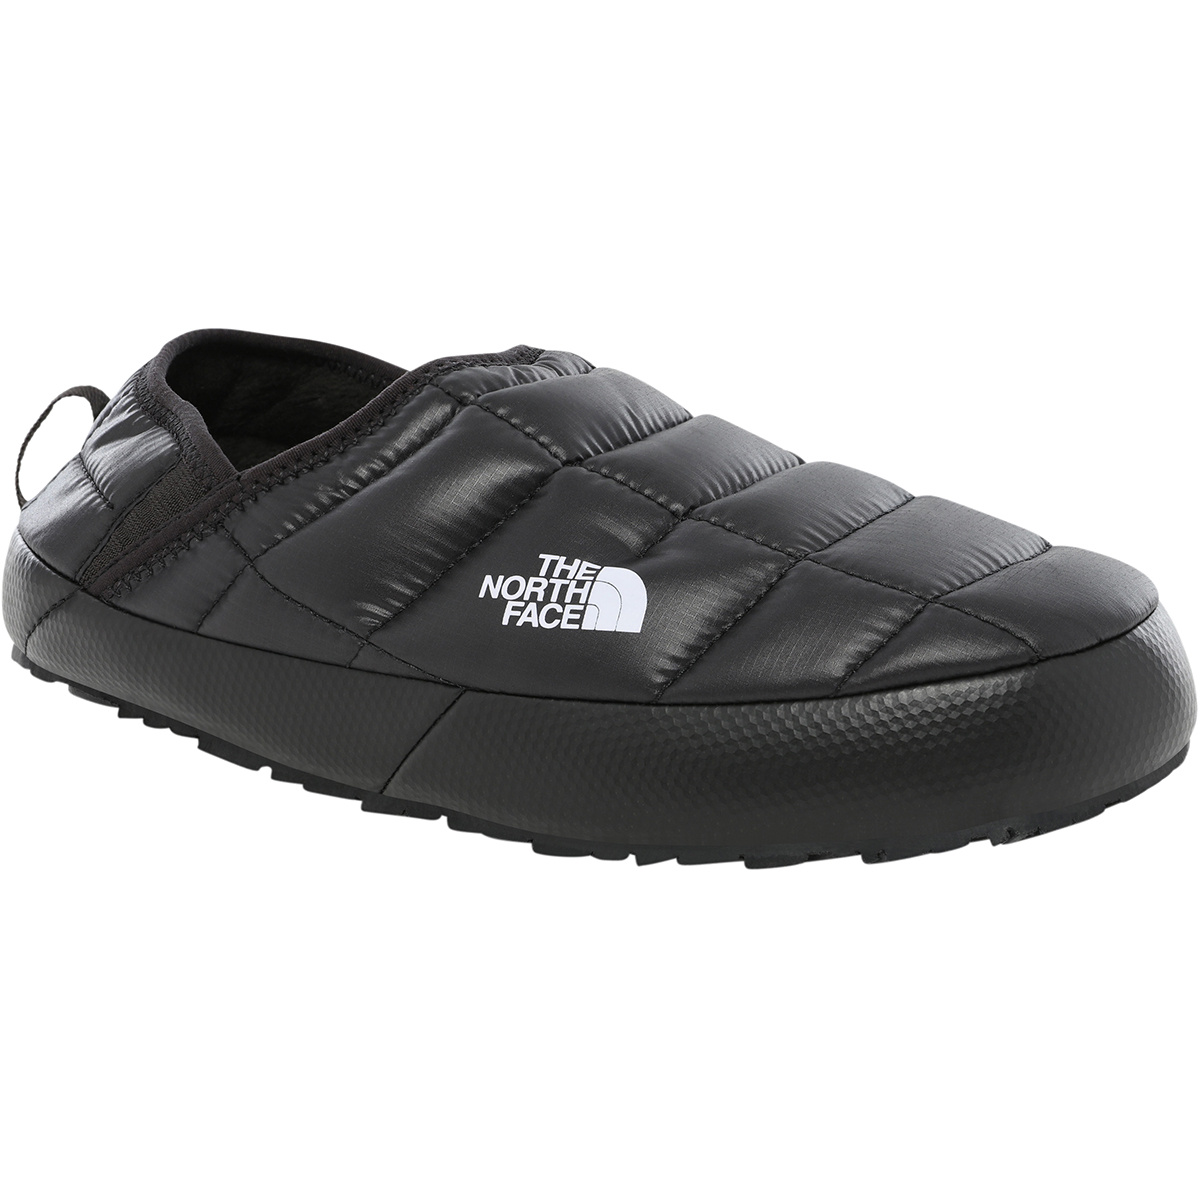 The North Face Damen Thermoball Traction Mule V Schuhe von The North Face